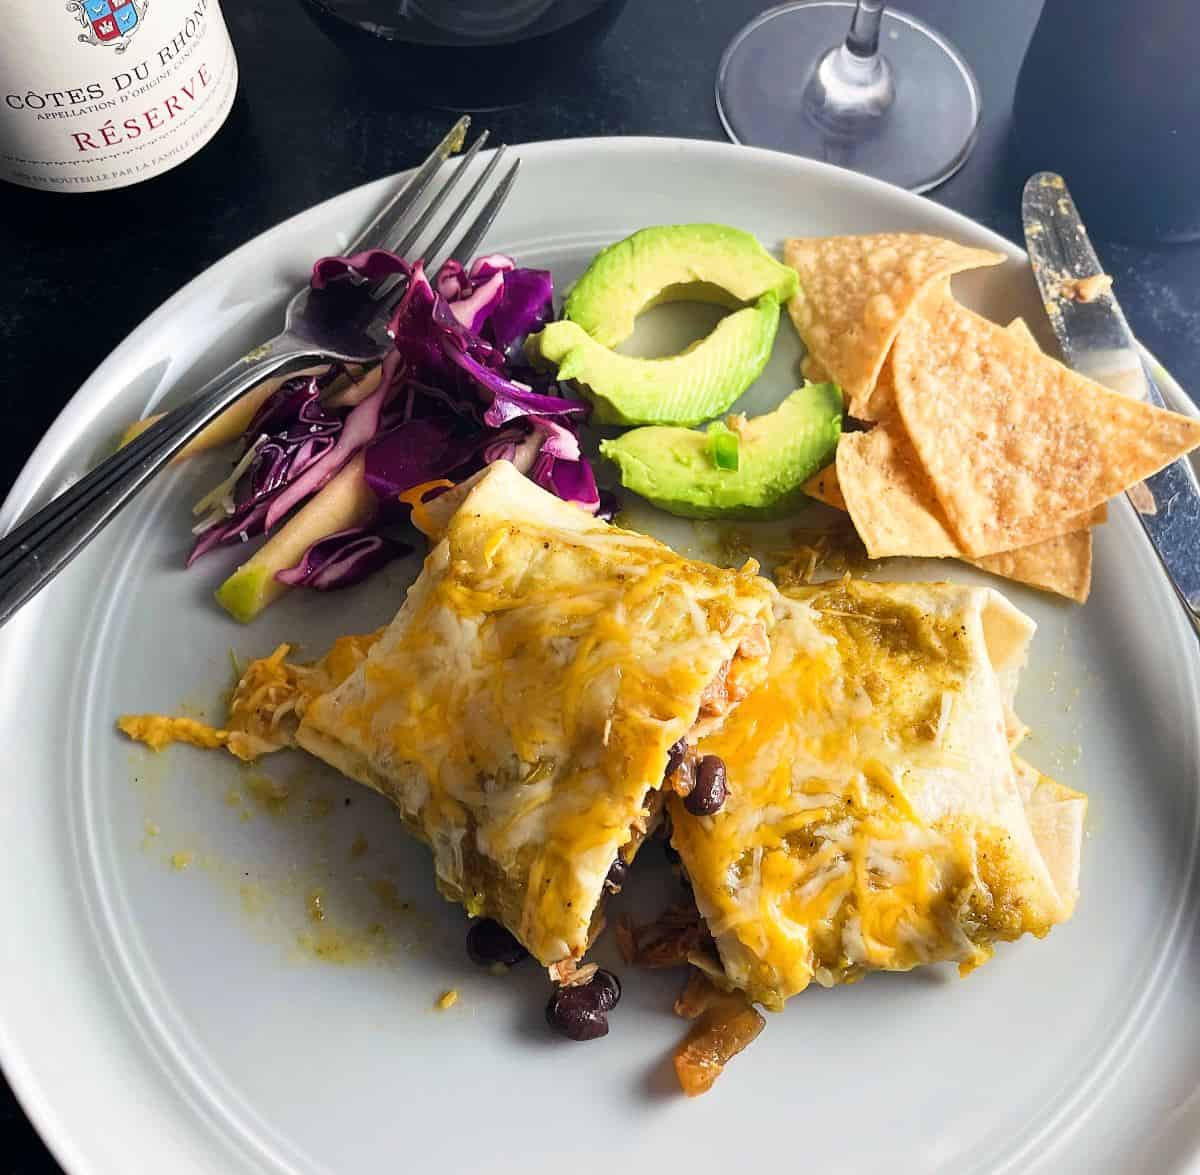 chicken and black bean enchilada cut in half, served with cabbage slaw and avocado slices, with a glass of red wine.